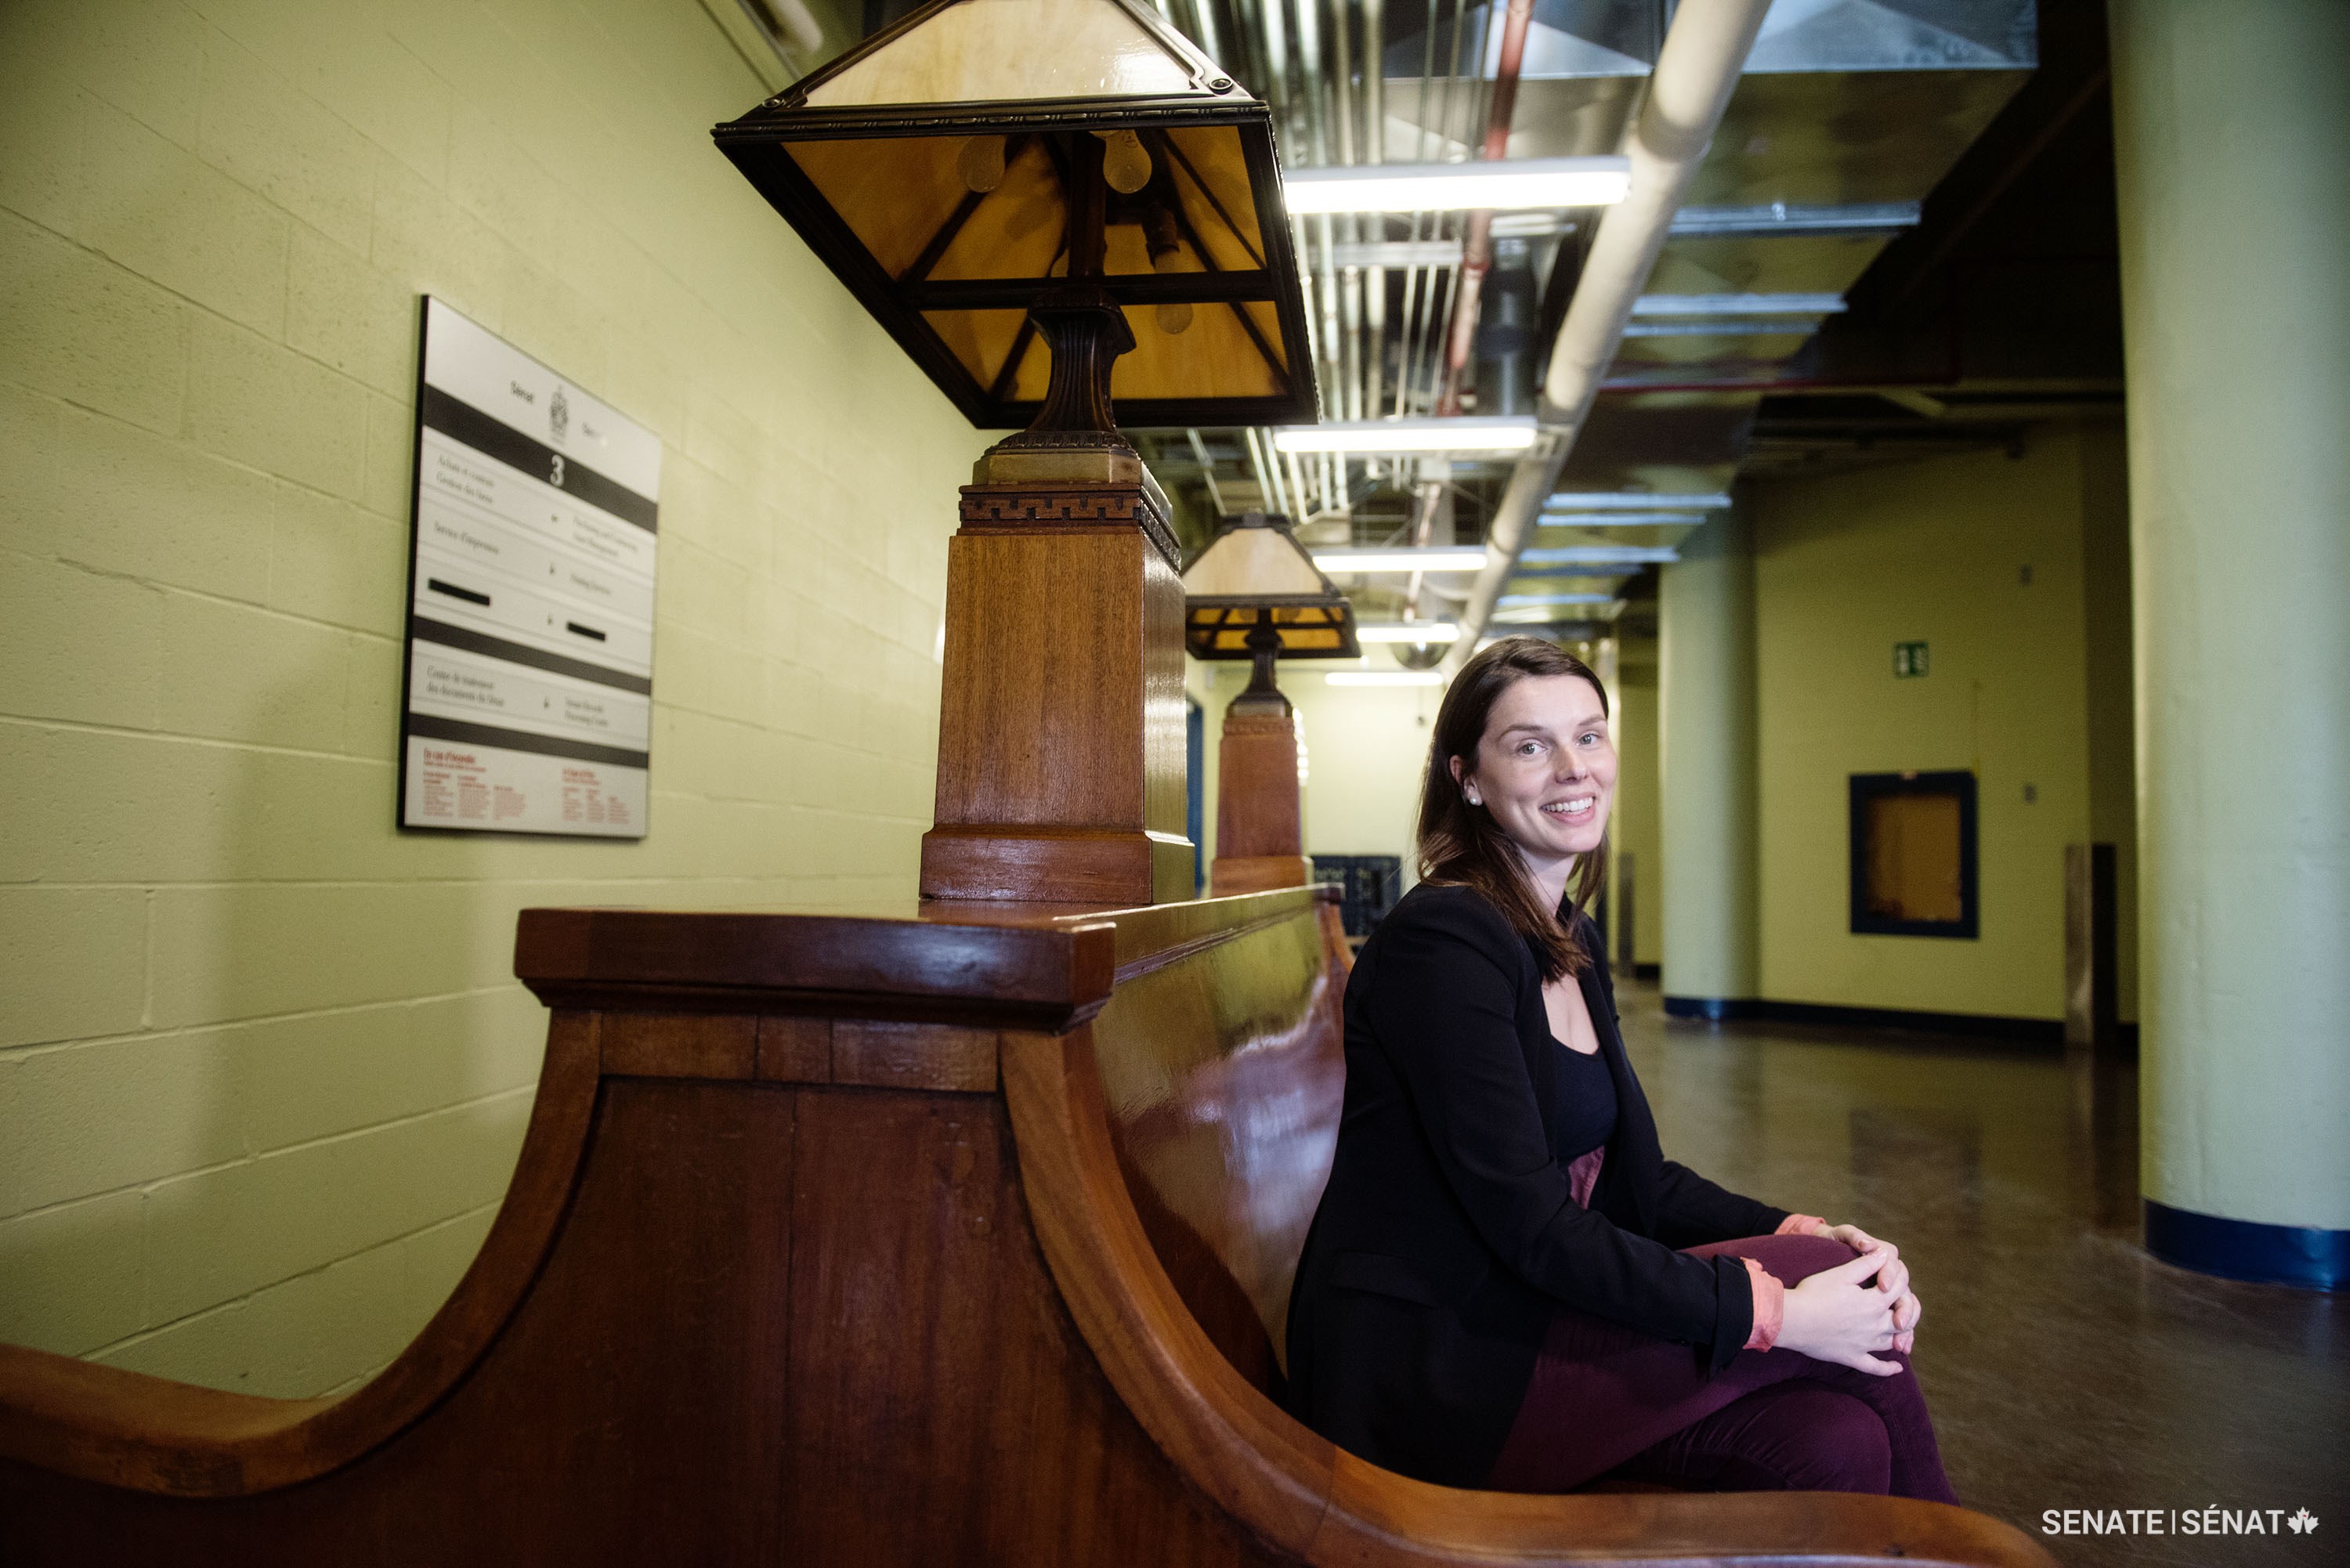 Senate Curator Tamara Dolan sits on the train station bench, a notable piece of heritage furniture in the Senate’s Artwork and Heritage Collection.